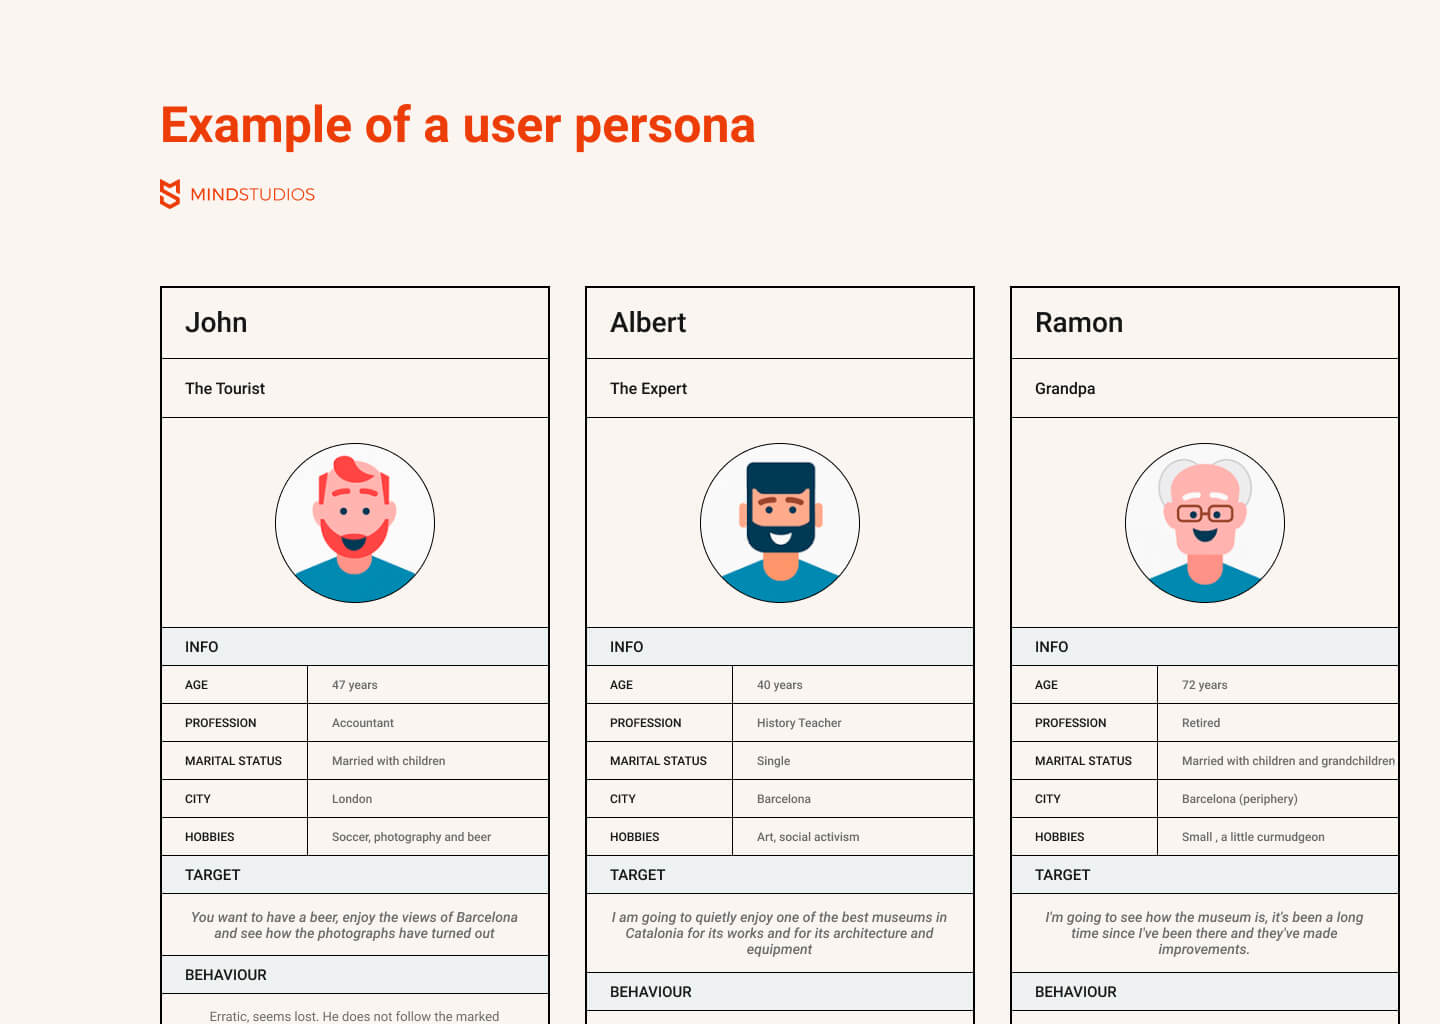 Example of a user persona